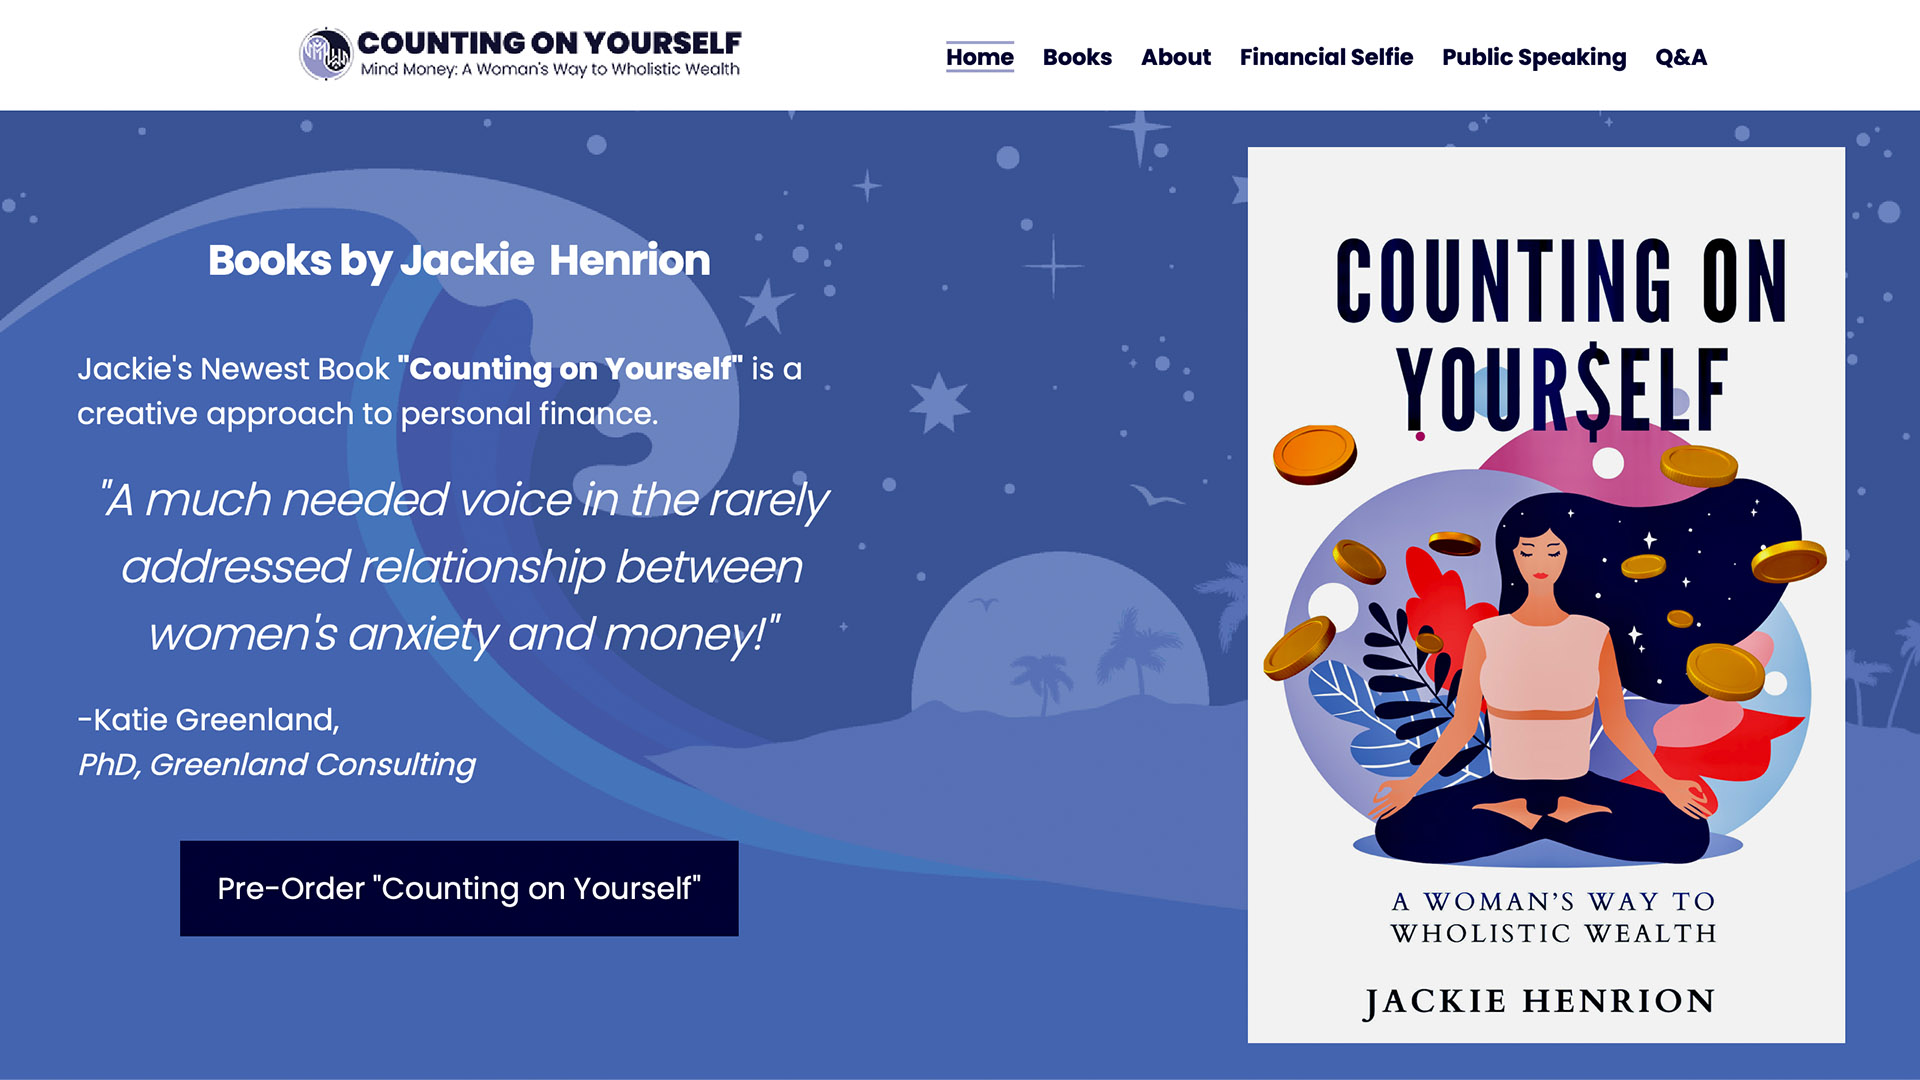 Website Homepage of 'Counting on Yourself' by Jackie Henrion.